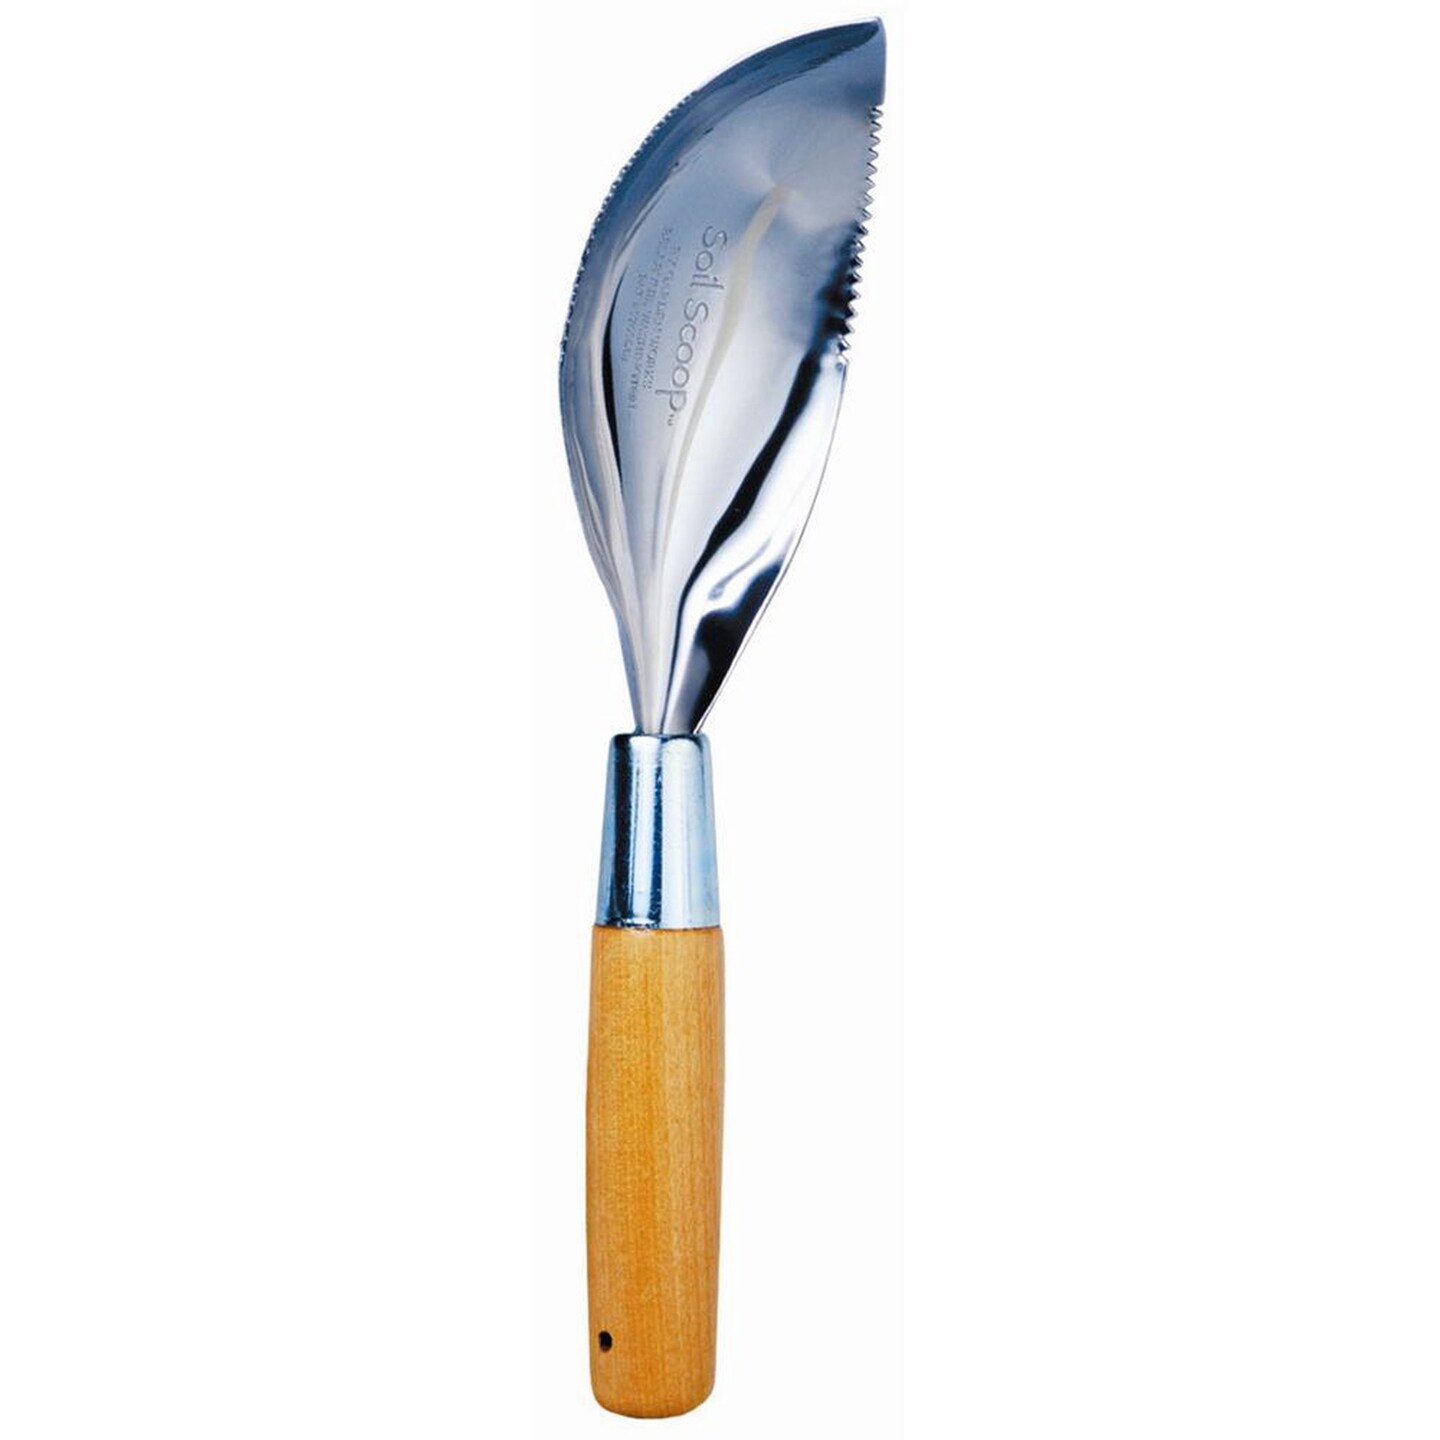 Soil Scoop Garden Tool, Hand Trowel Shovel Combo Makes Furrows and Trenches, Stainless Steel and Birch Wood